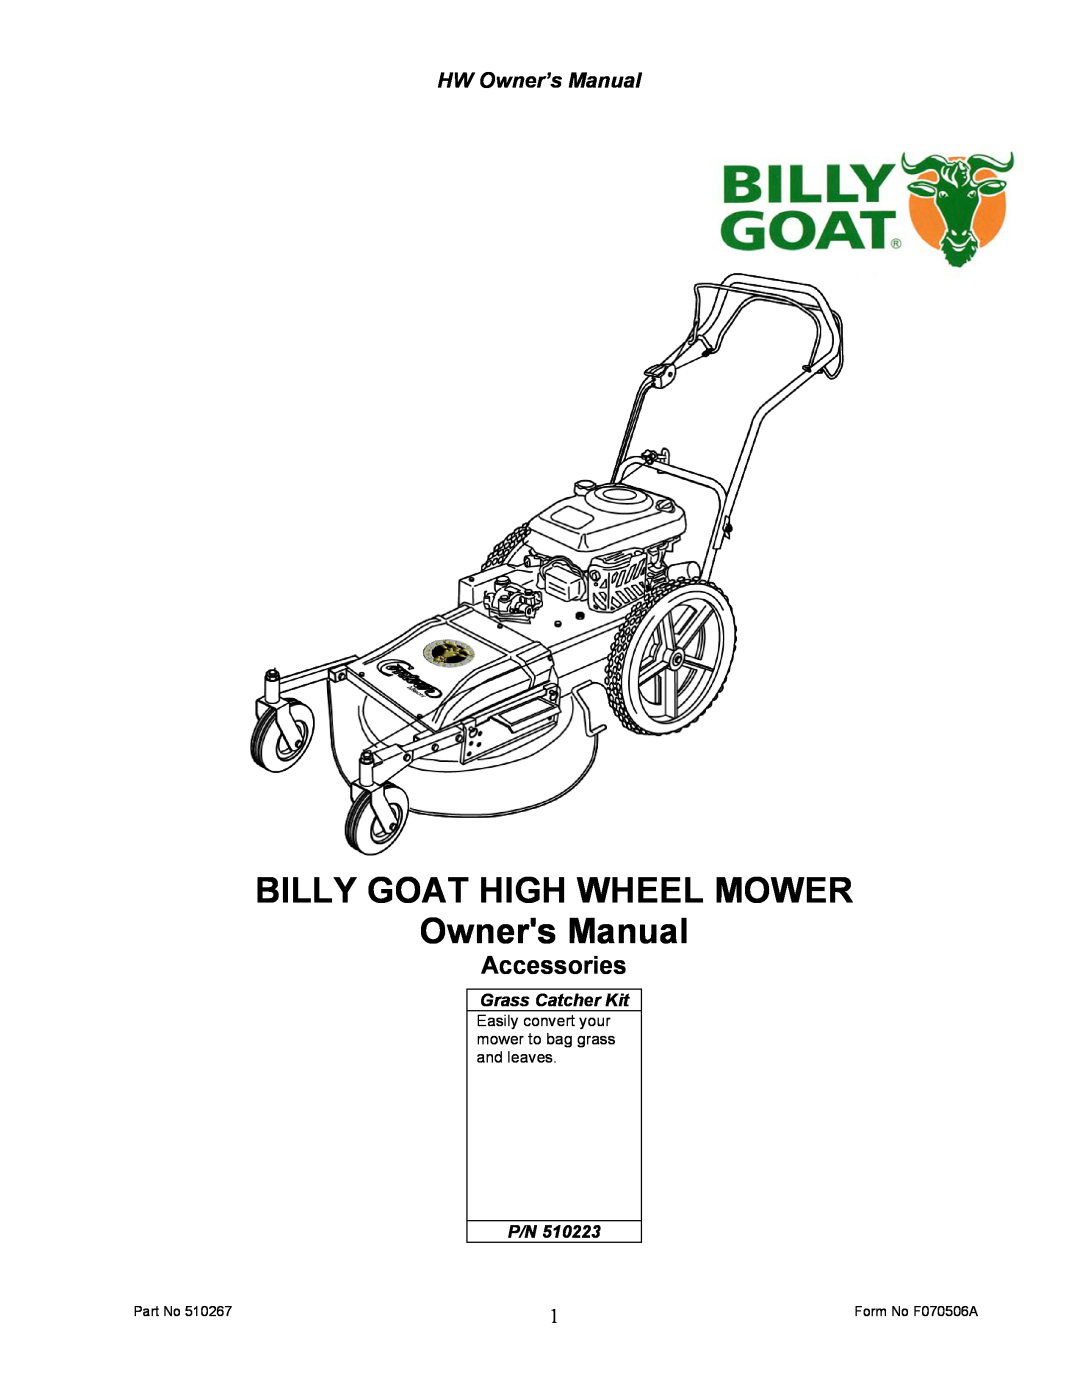 Billy Goat 510223 owner manual Accessories, BILLY GOAT HIGH WHEEL MOWER Owners Manual, Grass Catcher Kit 